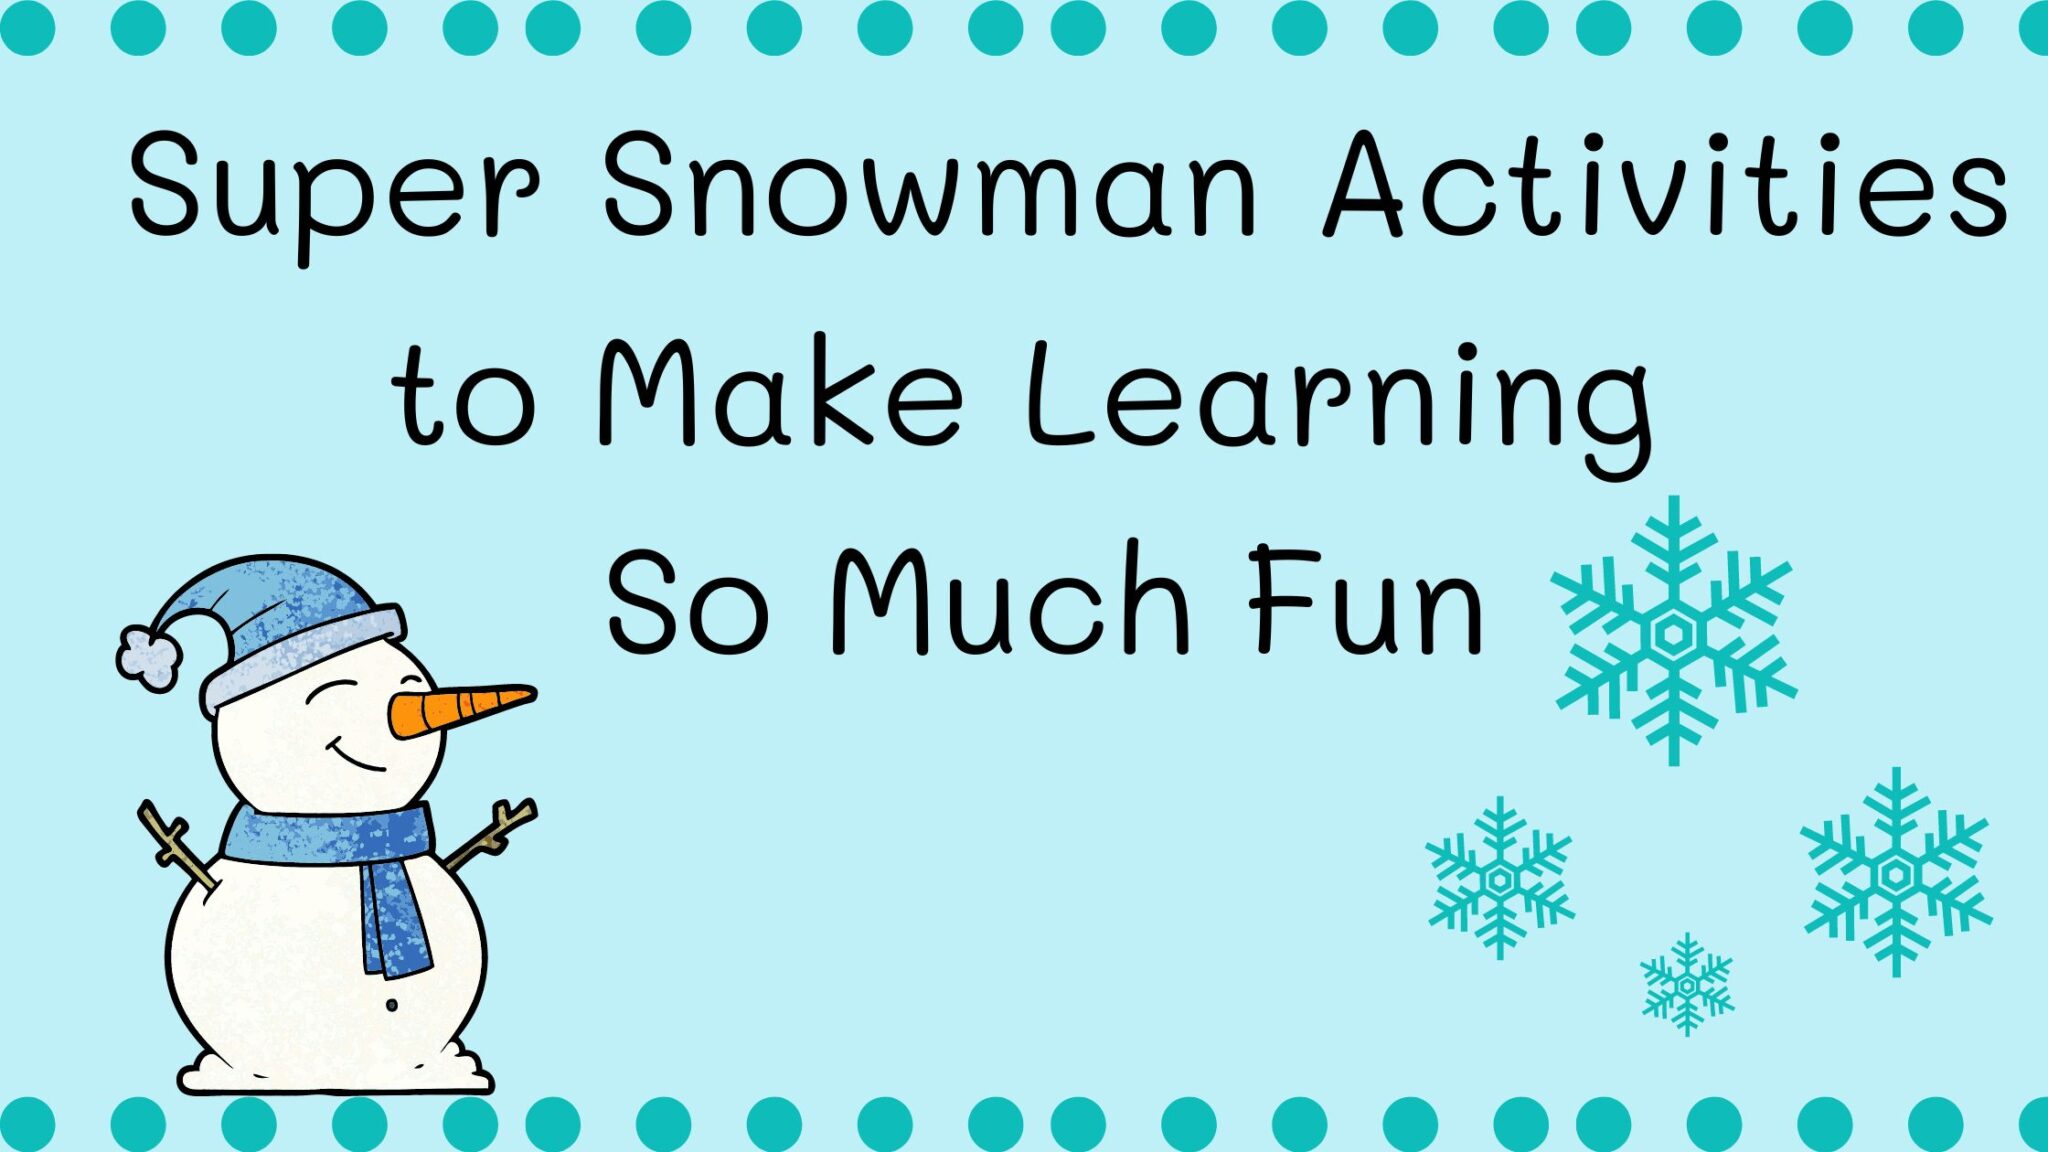 10 Cool Snowman Activities for Kids (no snow required!) - Crafty Kids at  Home